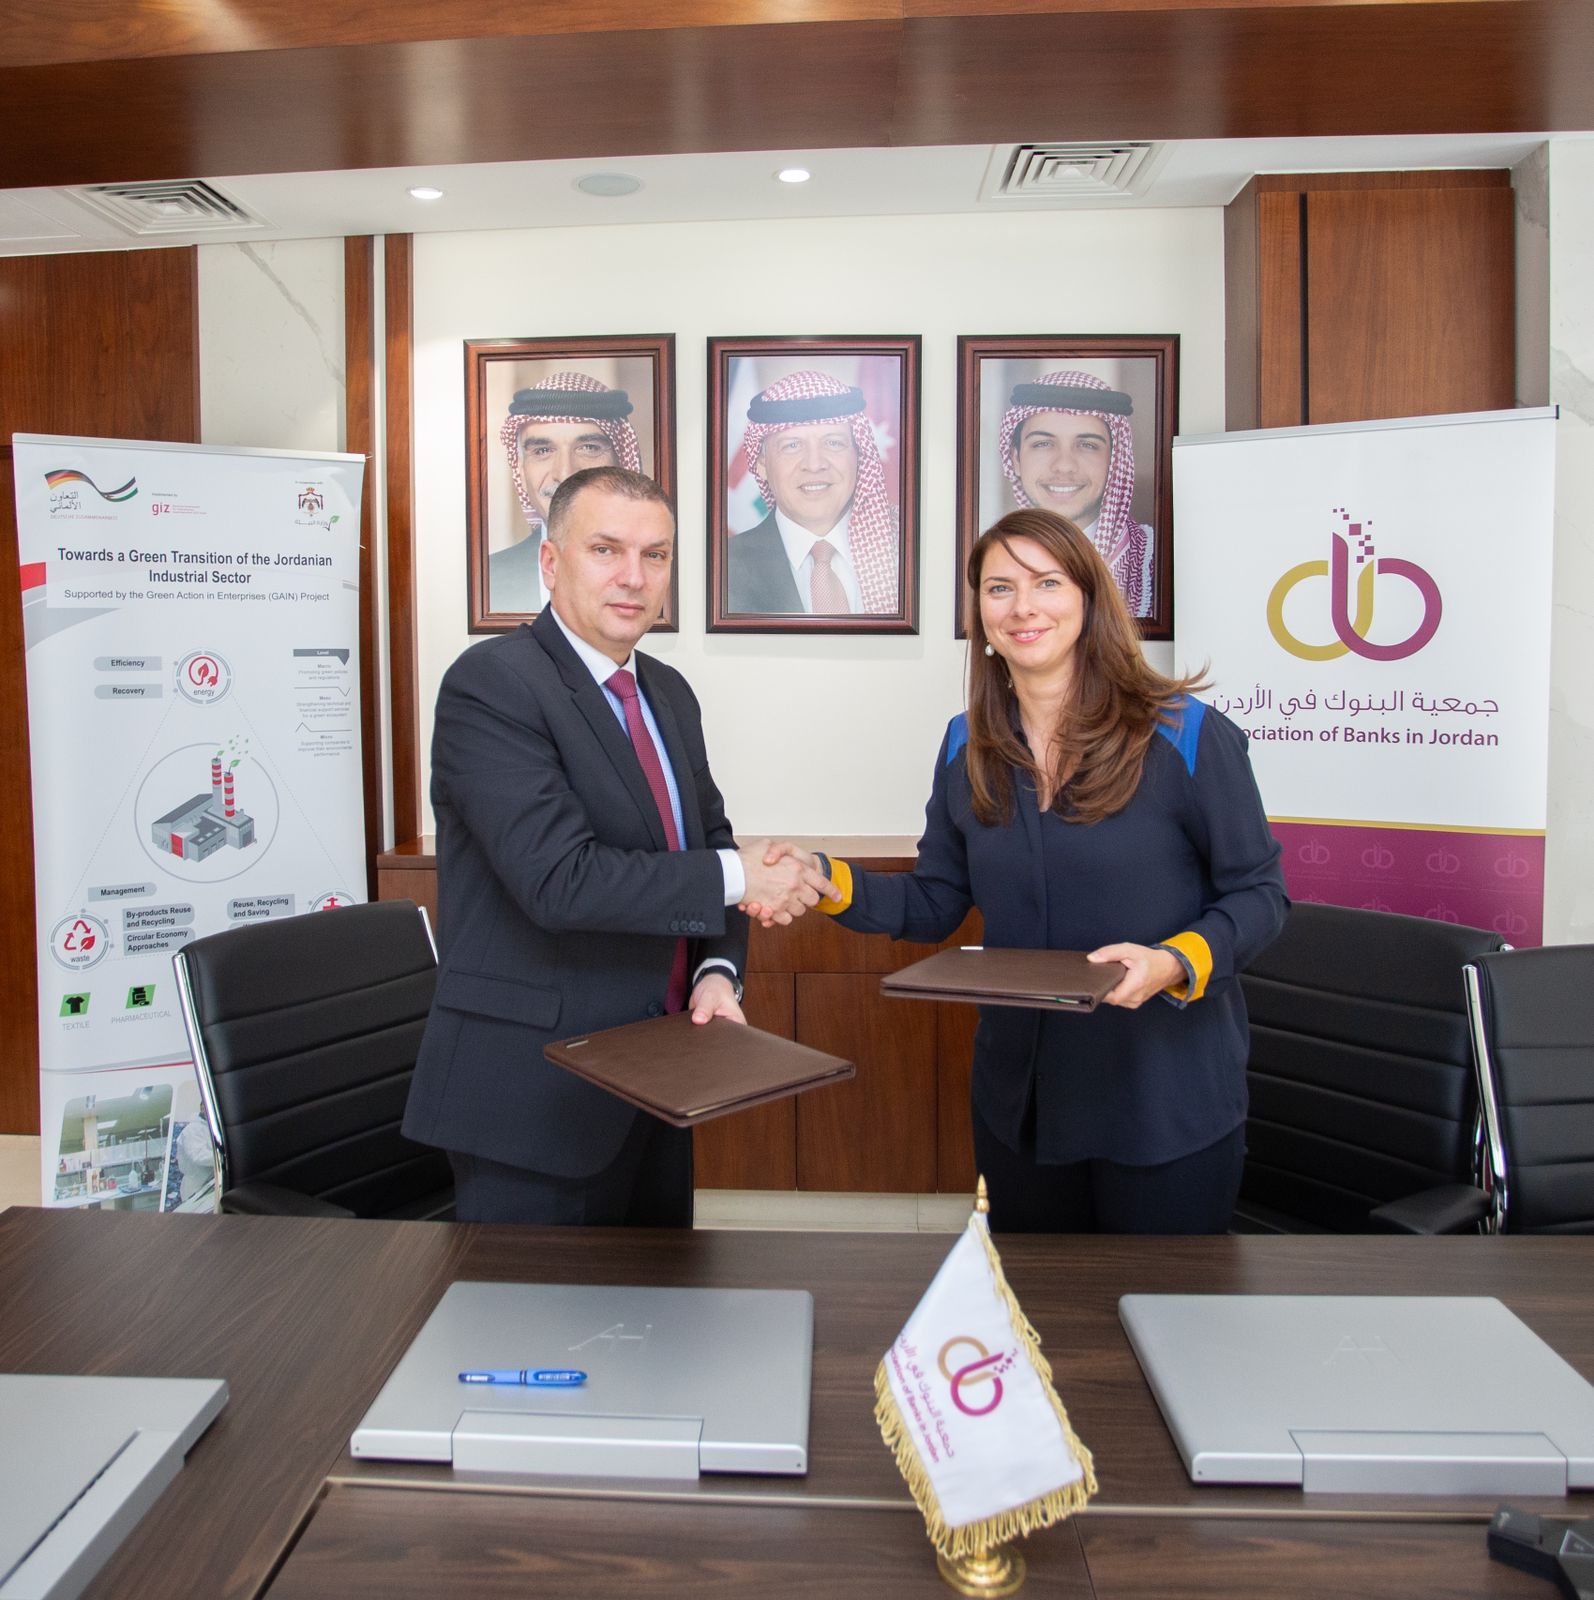 The Association of Banks and the Green Action in Enterprises (GAIN) signed the agreement for the second phase of their collaboration.